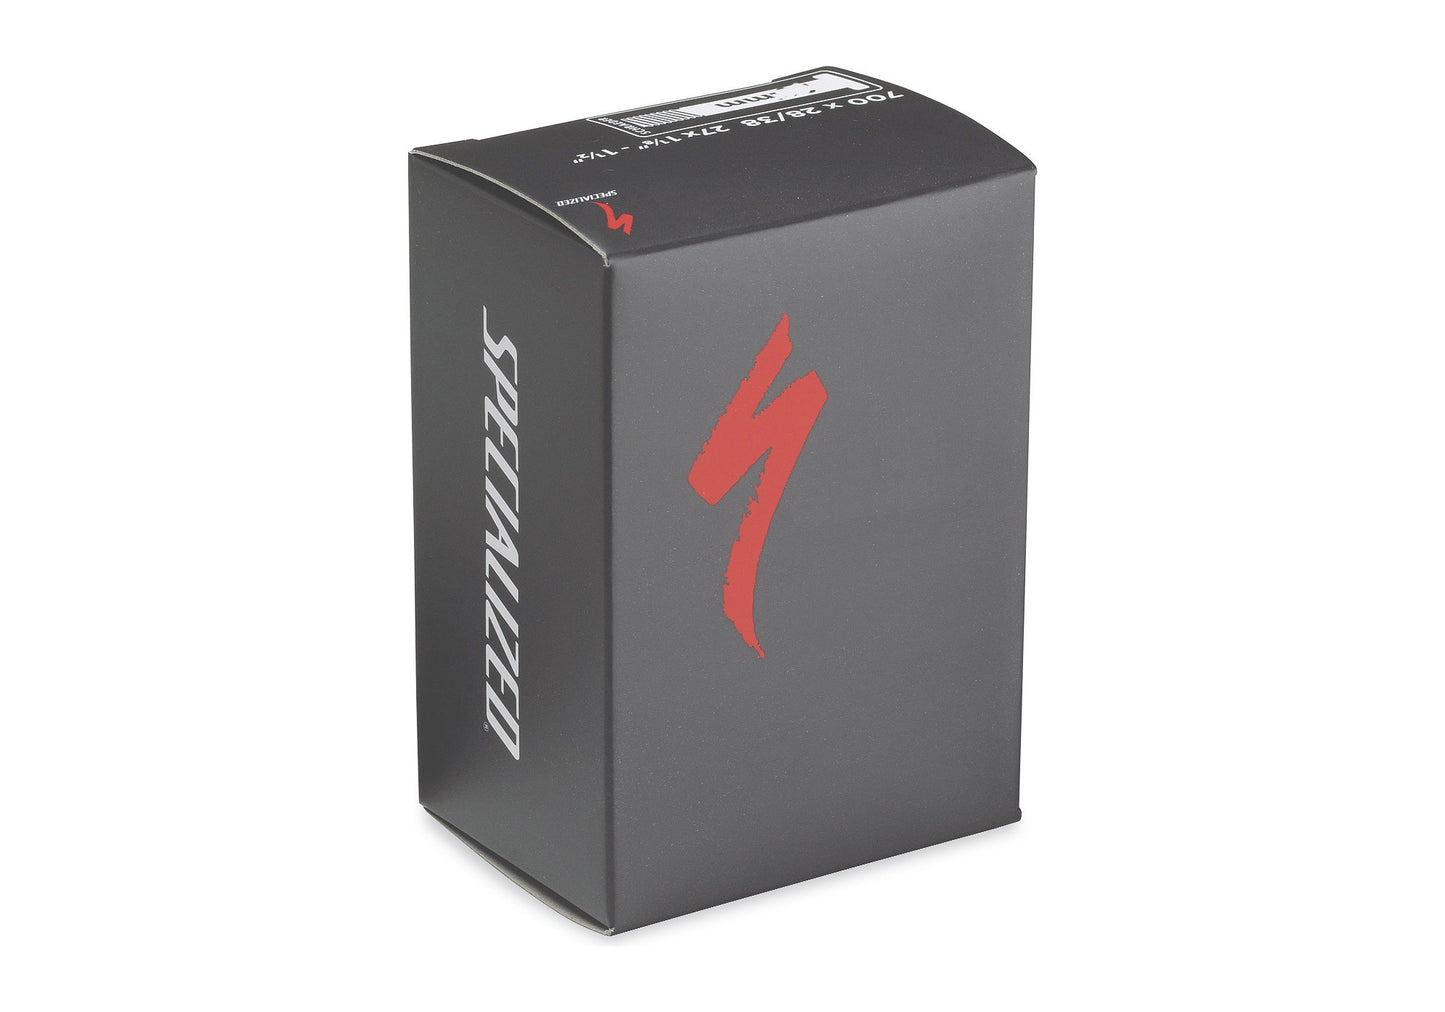 Specialized Schrader Valve Bicycle Tube 650B x 1.75-2.4"